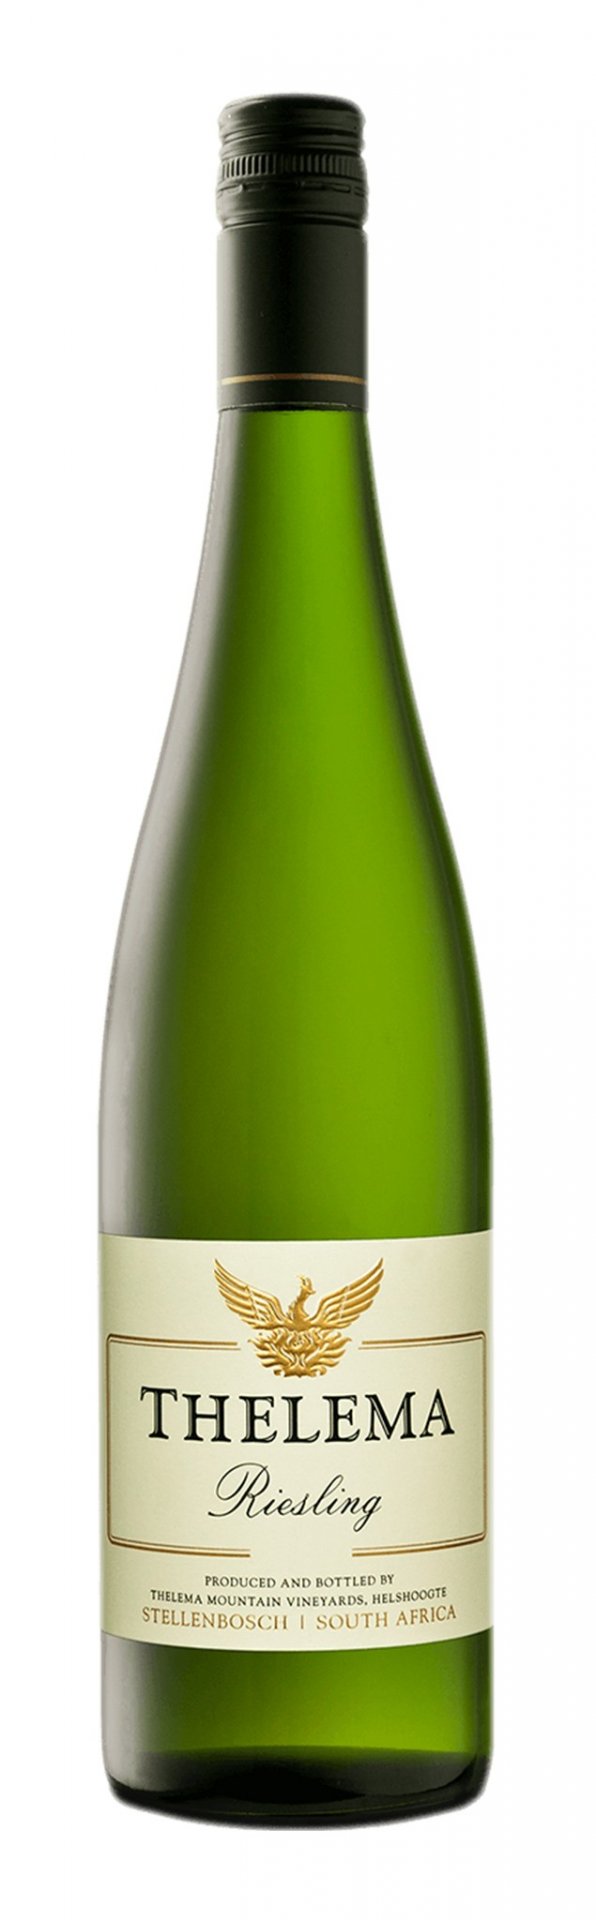 Thelema Riesling